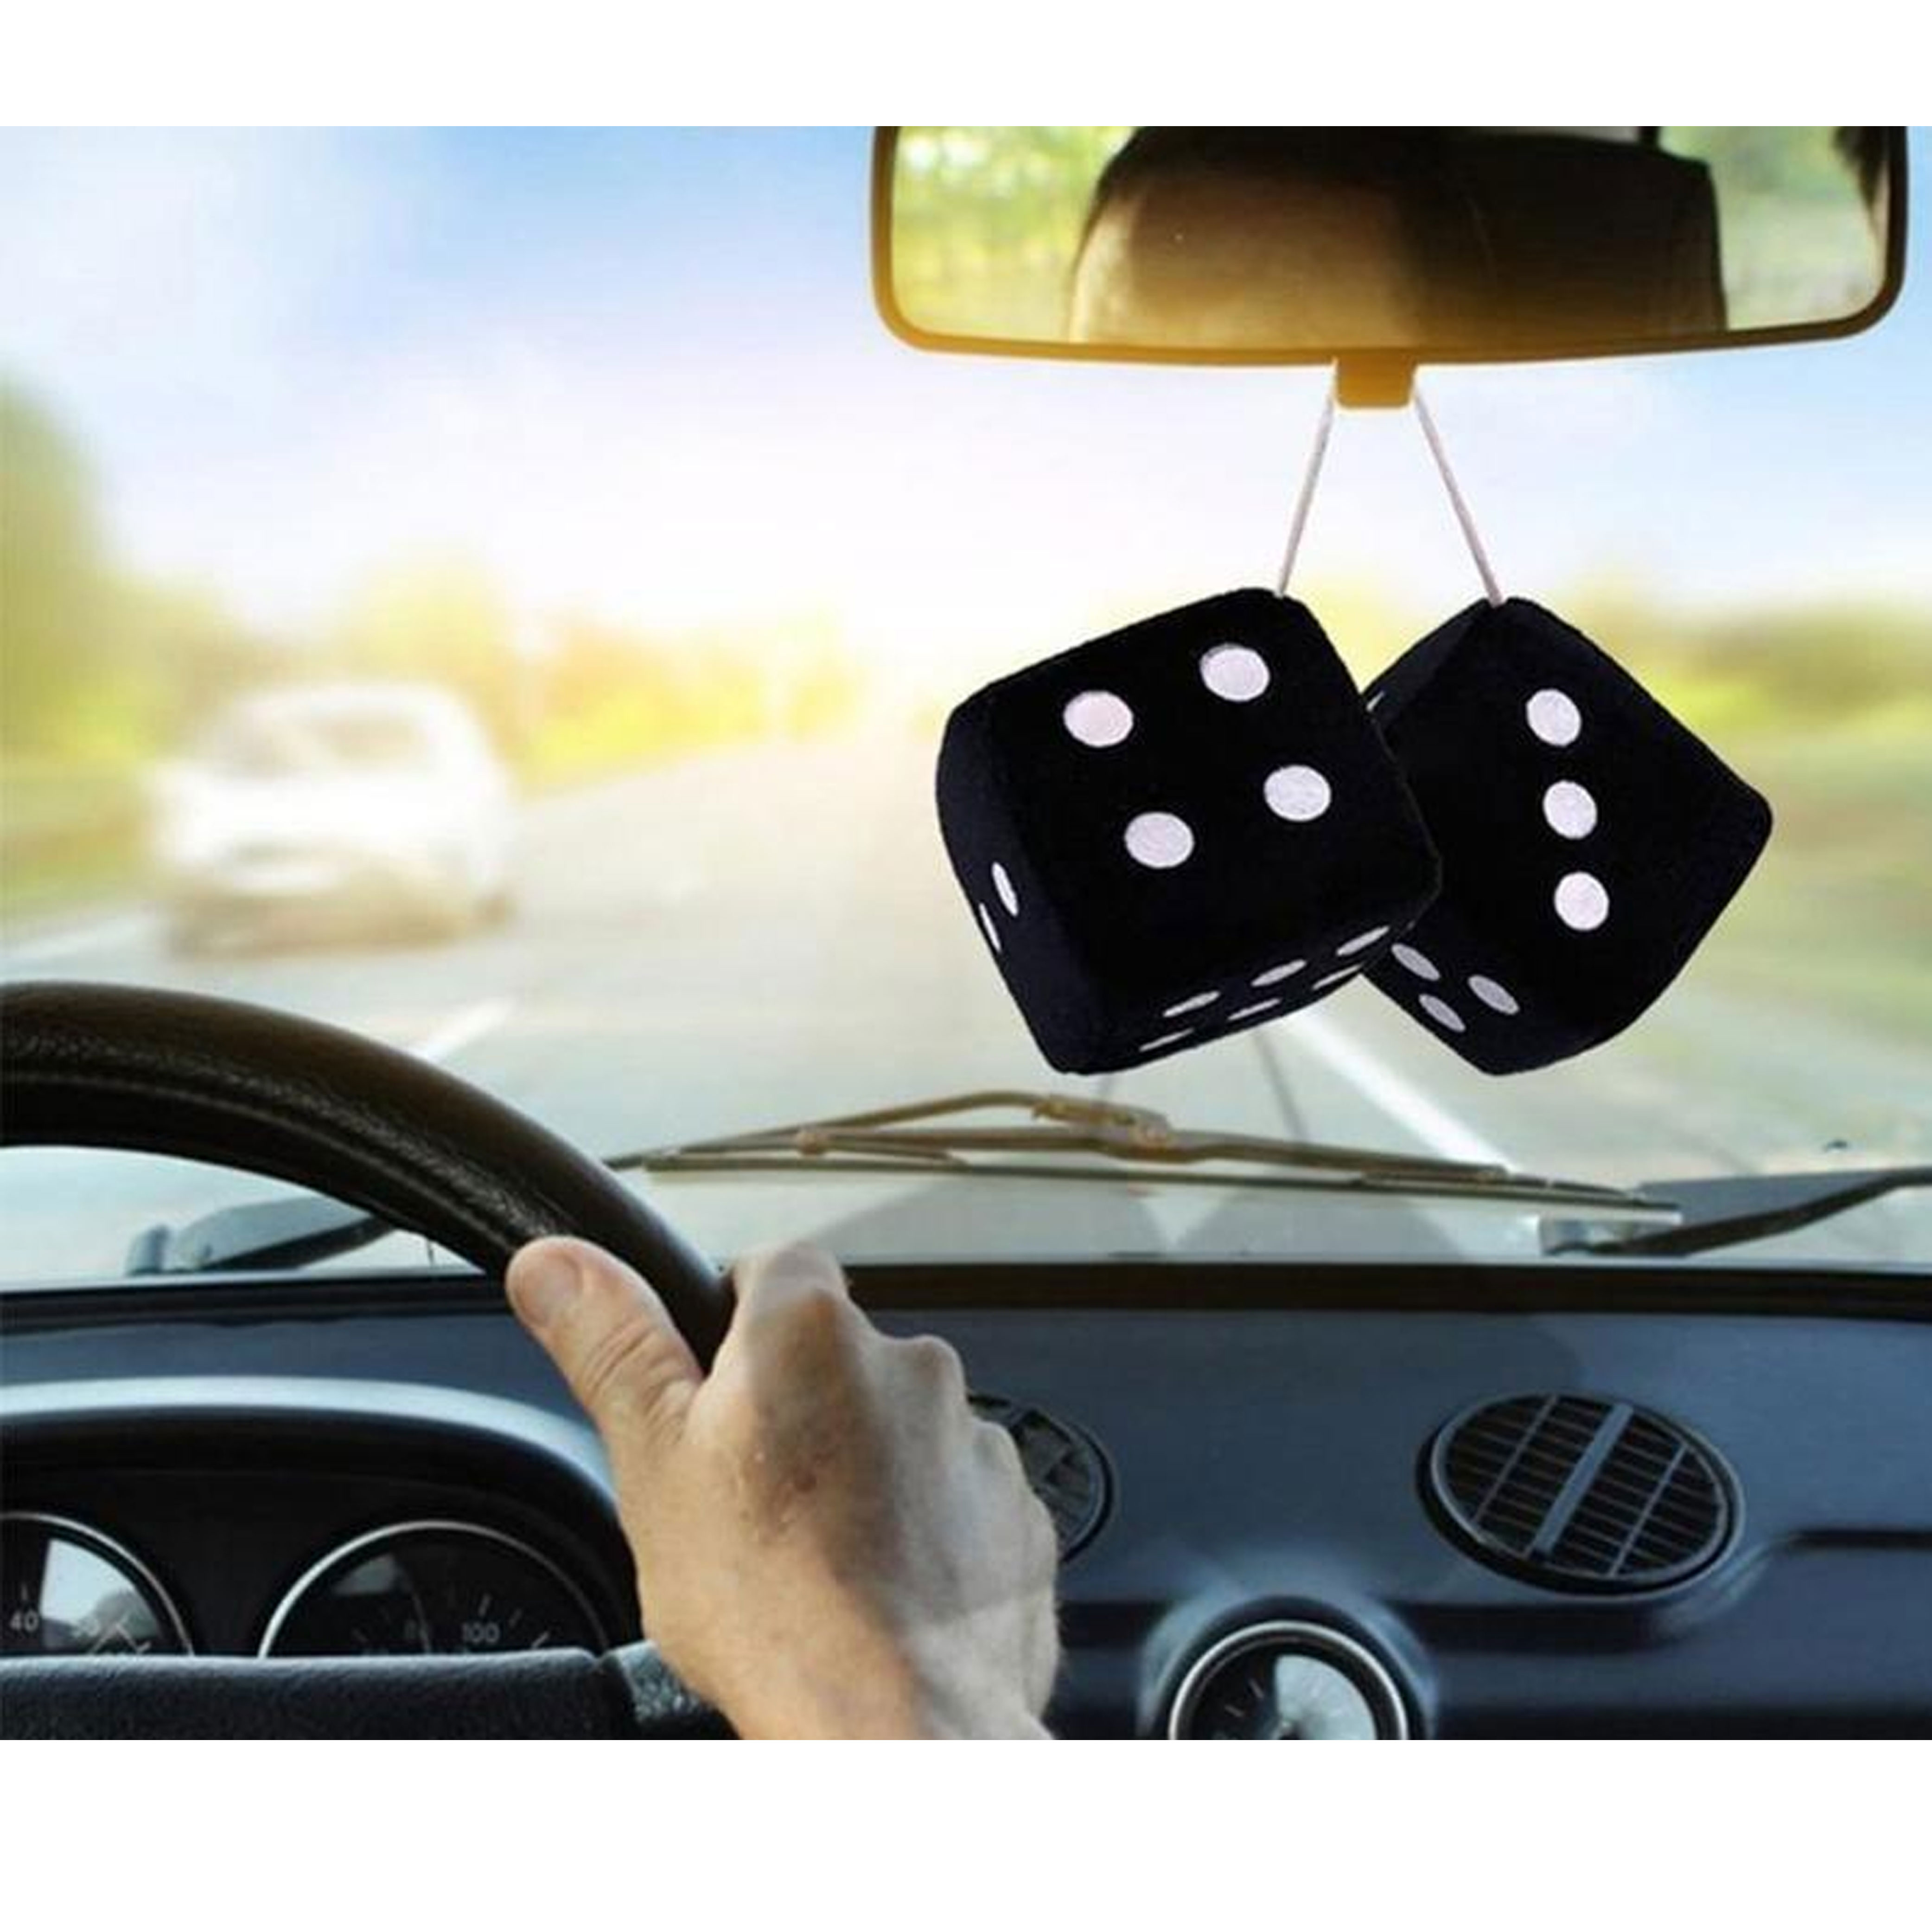 Fuzzy Dice Toy On Rearview Car Stock Vector (Royalty Free